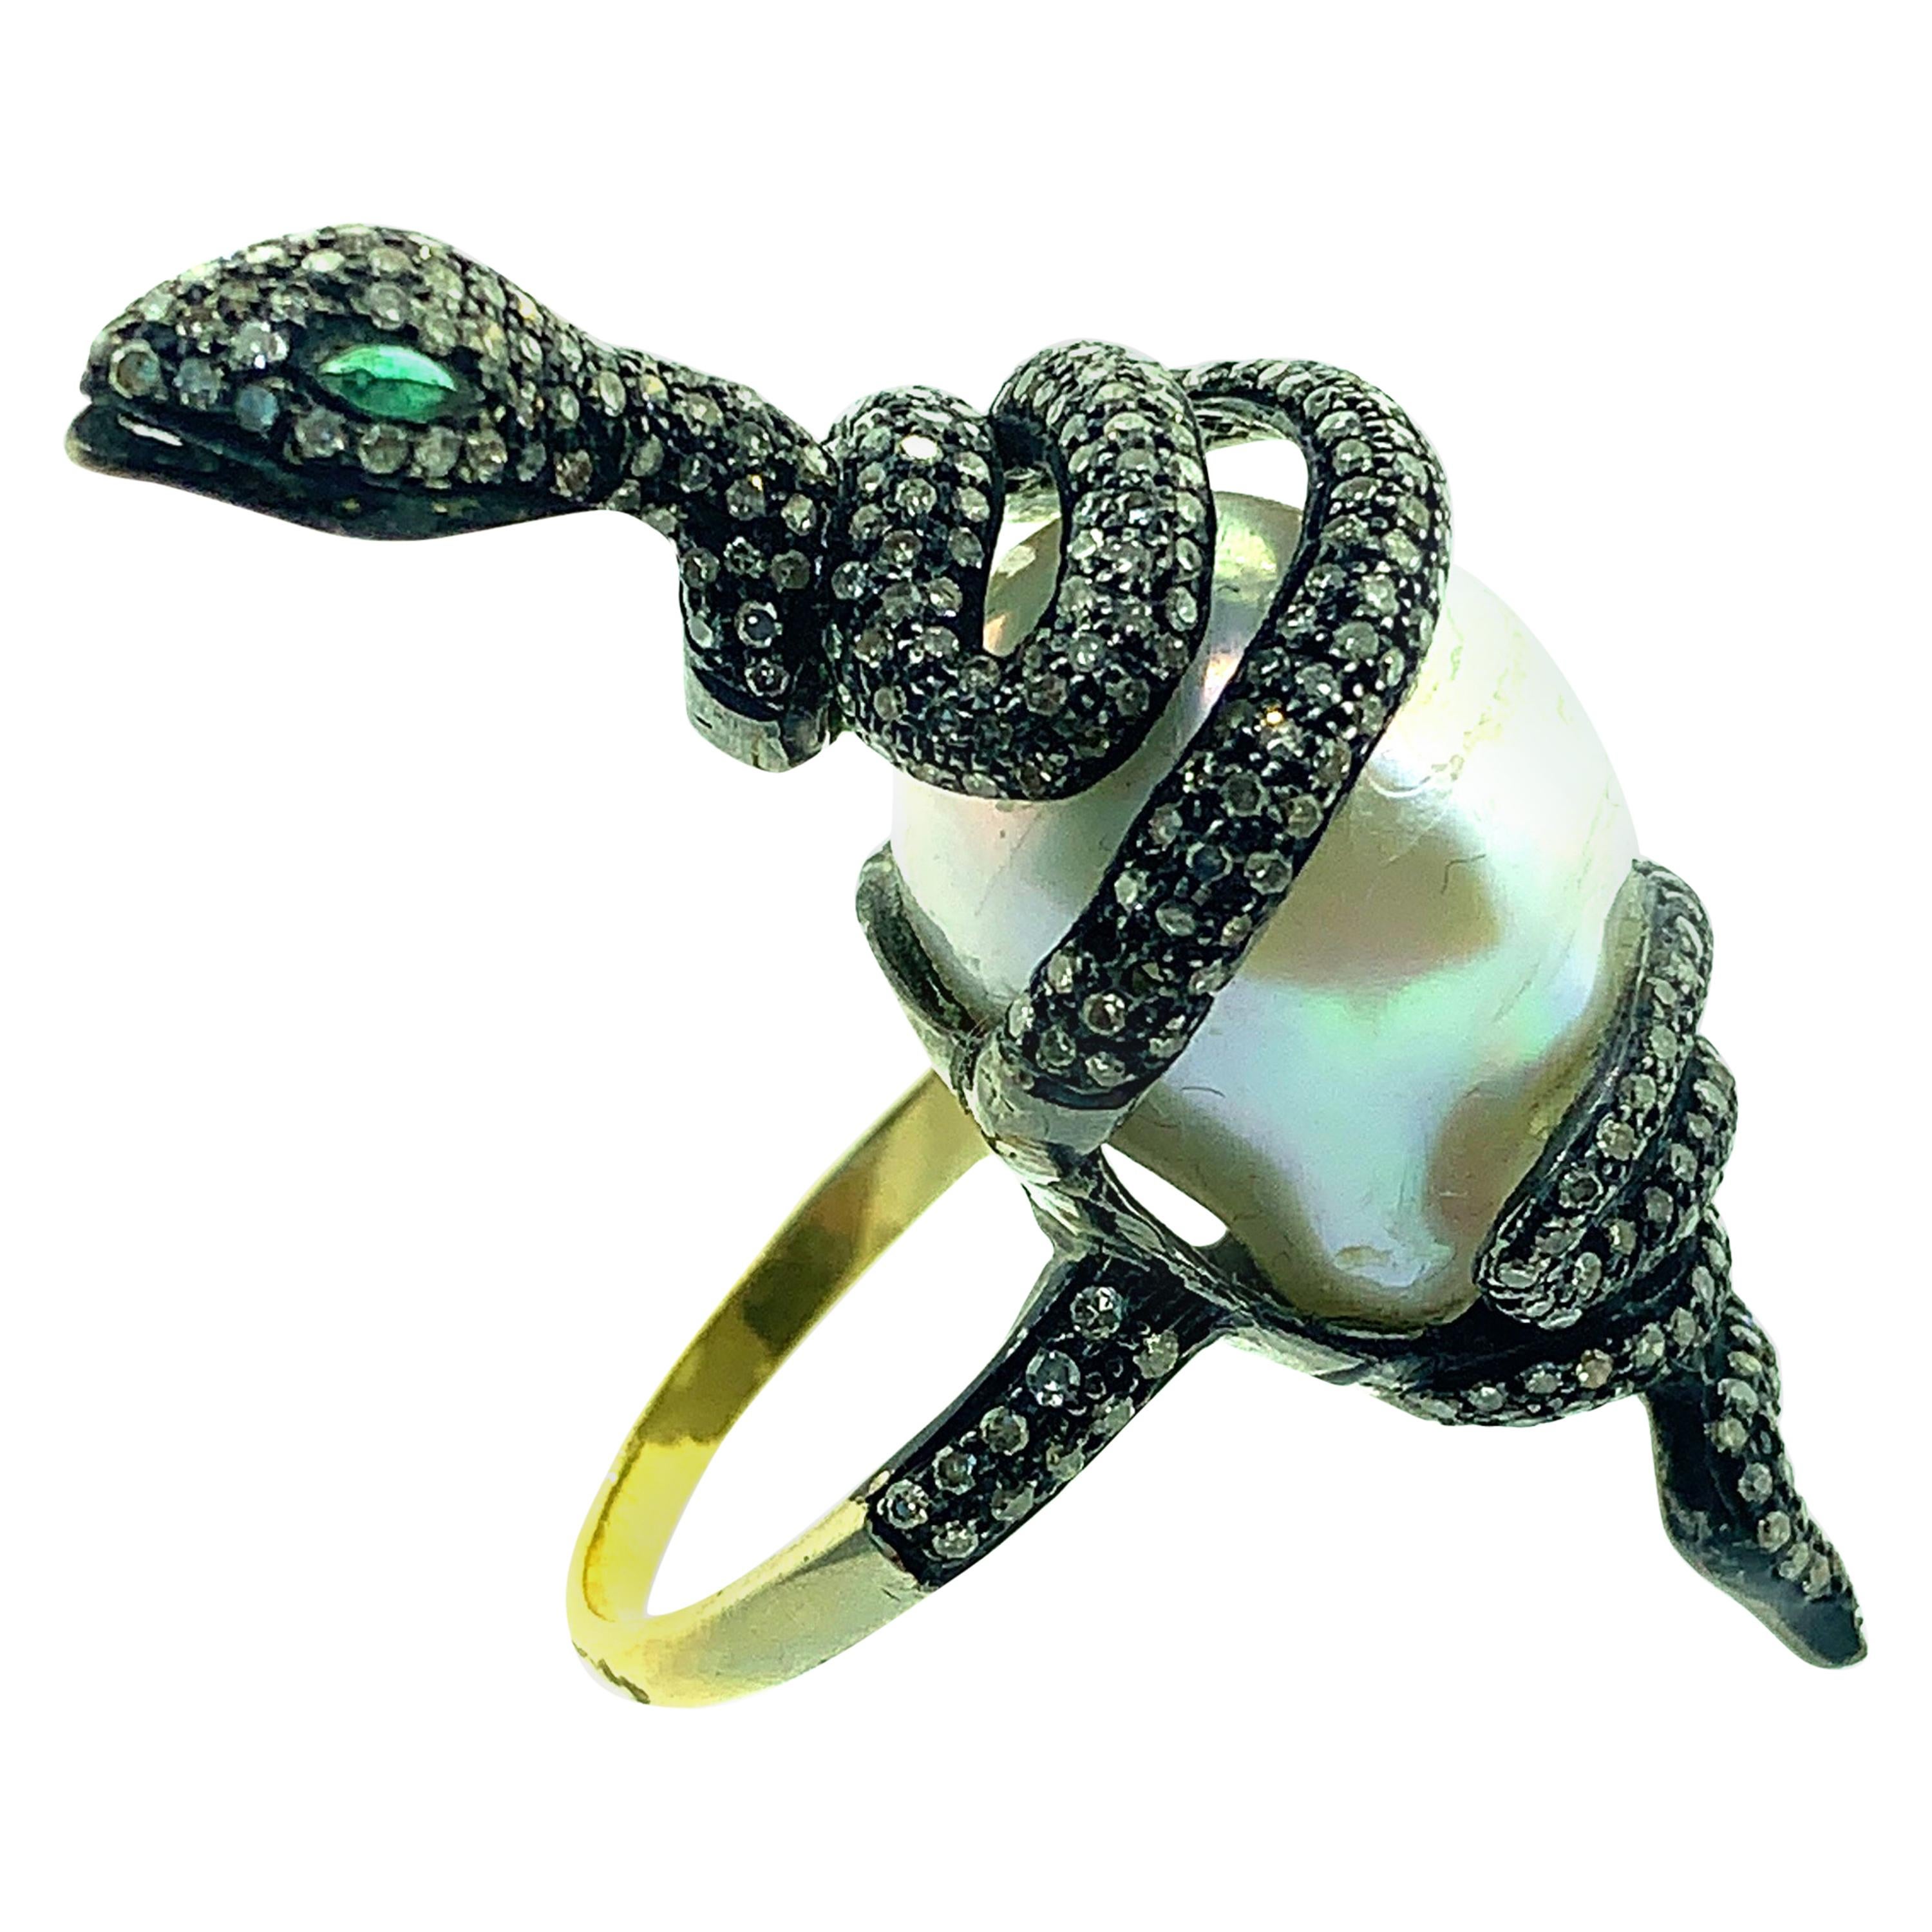 31.37Ct Pearl, 0.17Ct Emerald, 1.95Ct Diamonds Ring Sterling Silver, 14K Gold For Sale